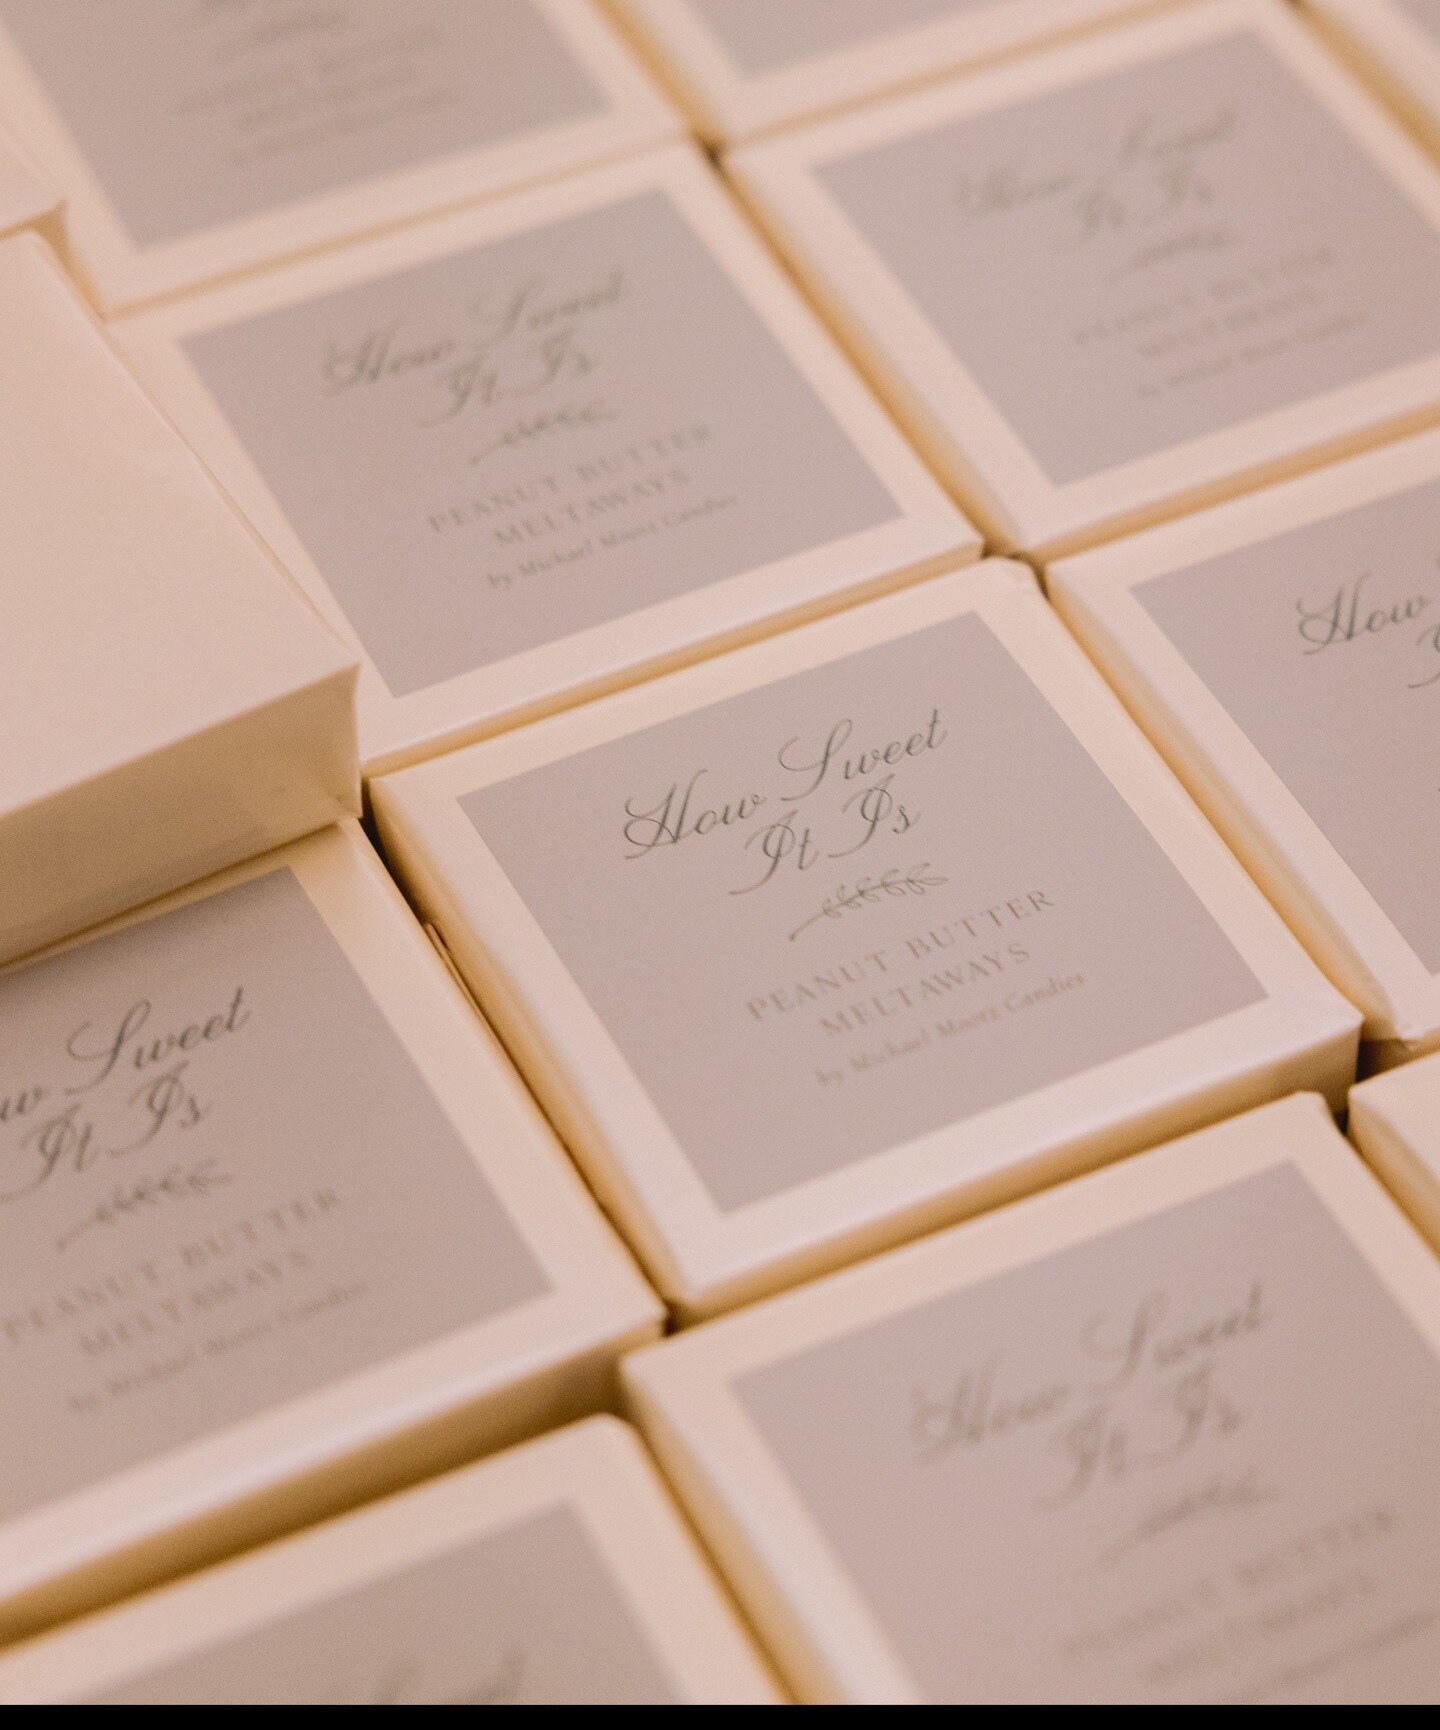 How Sweet It Is.⁠
⁠
A first dance song and wedding favors. Custom-crafted chocolates by @michael_mootz_candies, topped with bespoke labels. Thoughtful and cohesive design elements from beginning to end; my favorite type of project.⁠
⁠
Photo | @hudson